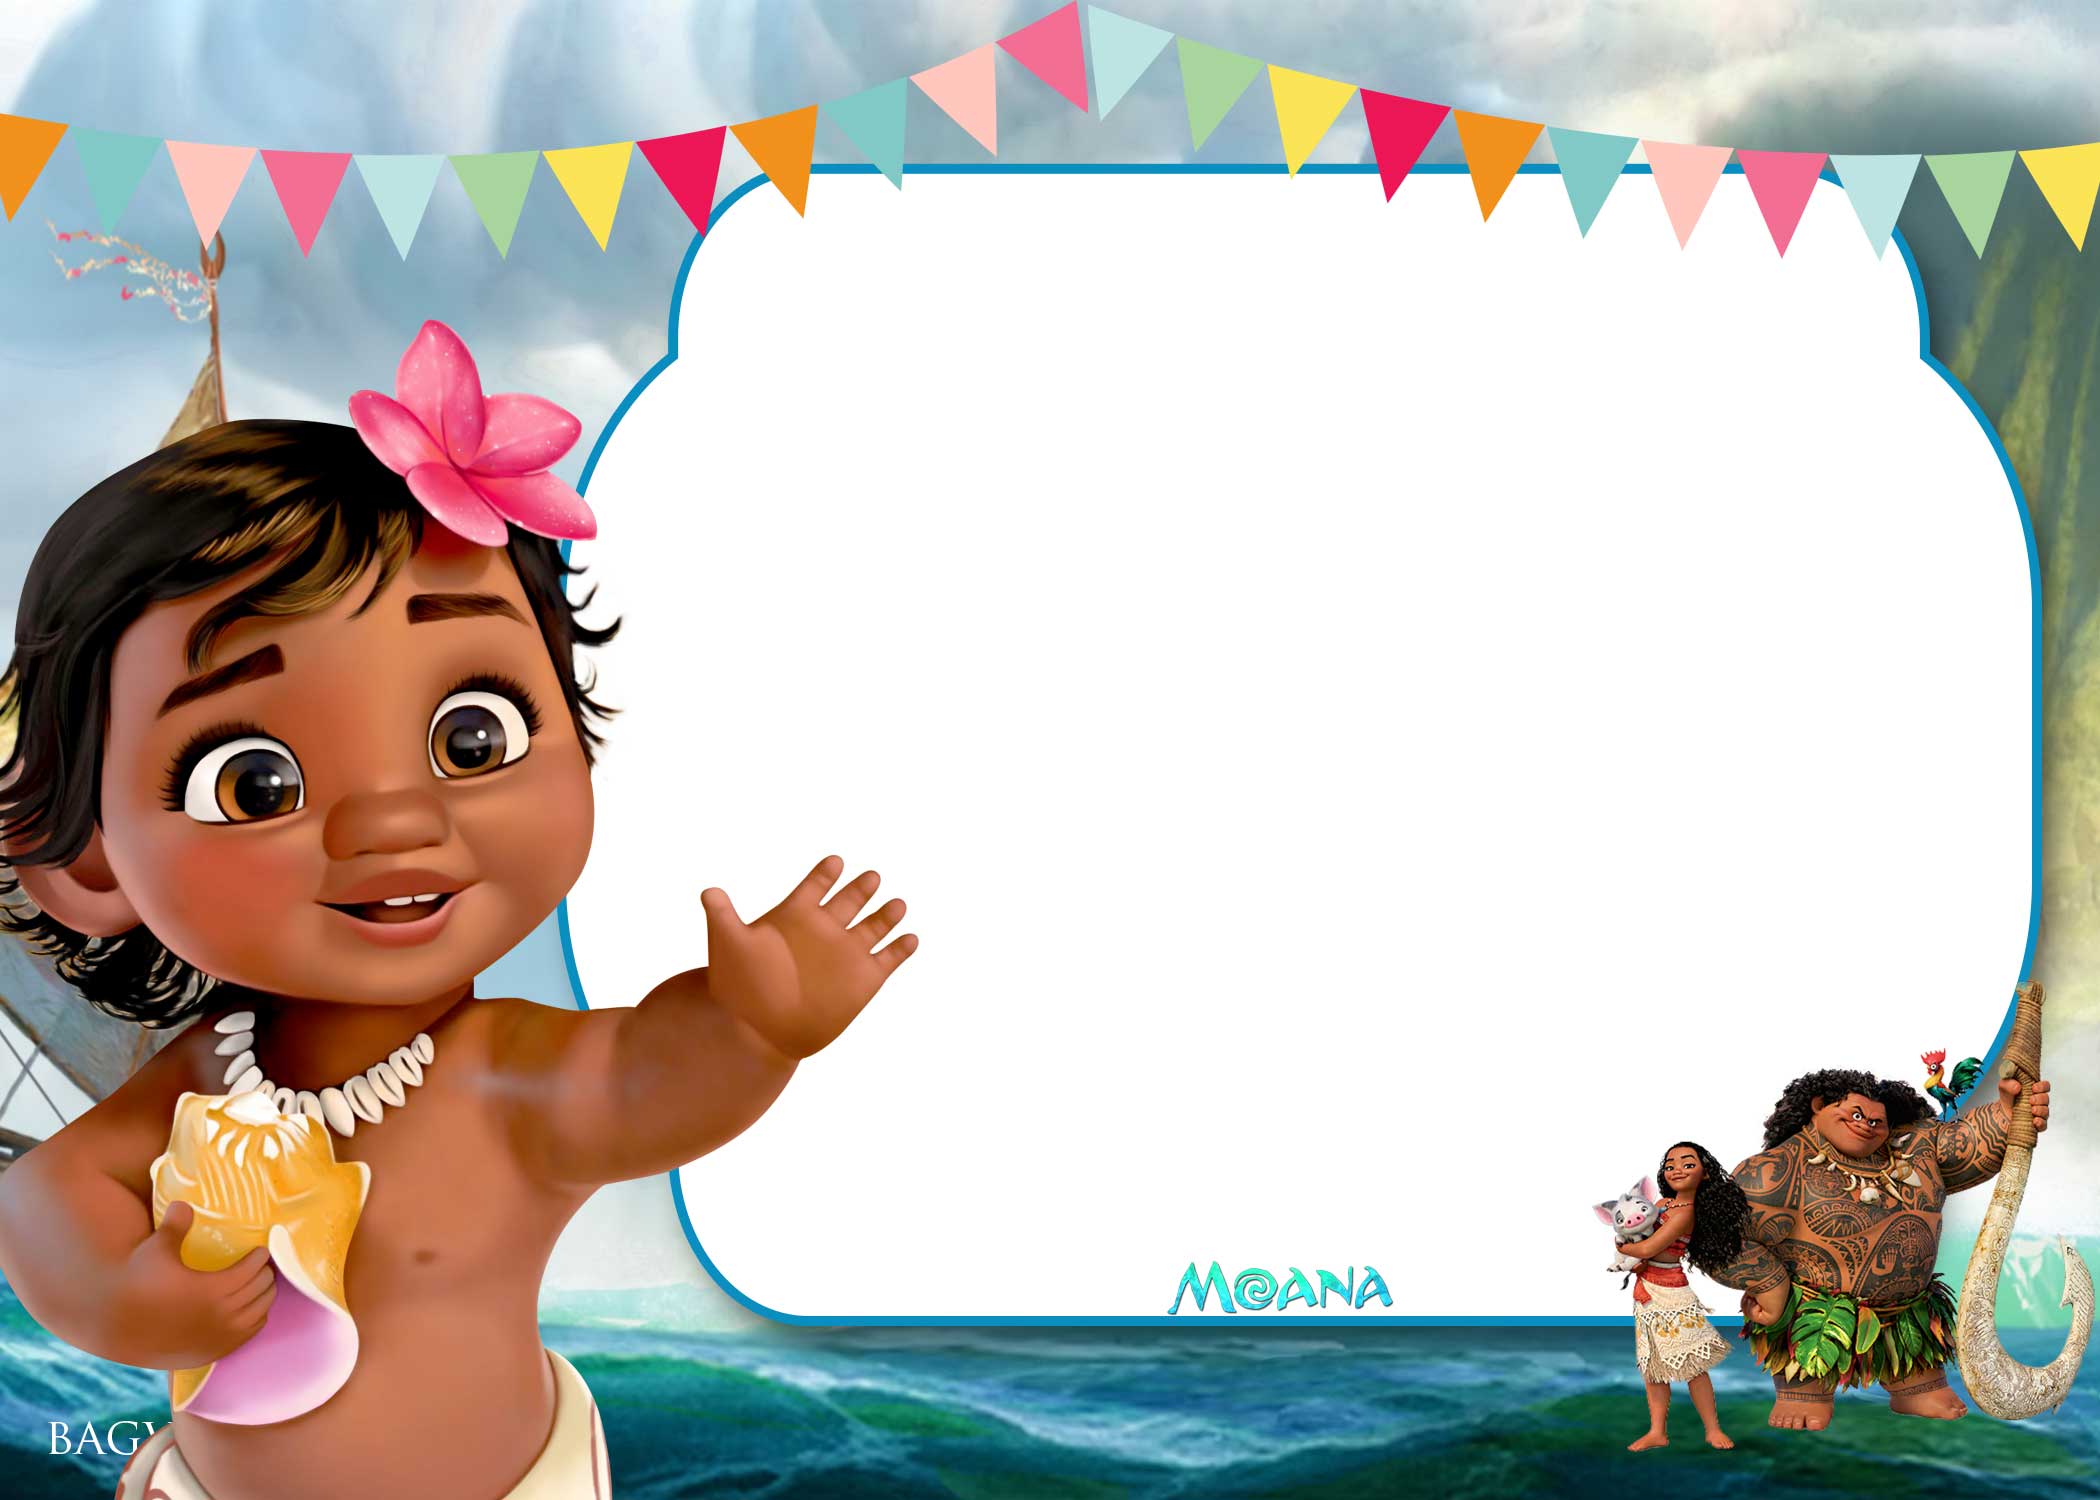 Baby Moana Wallpaper, image collections of wallpaper